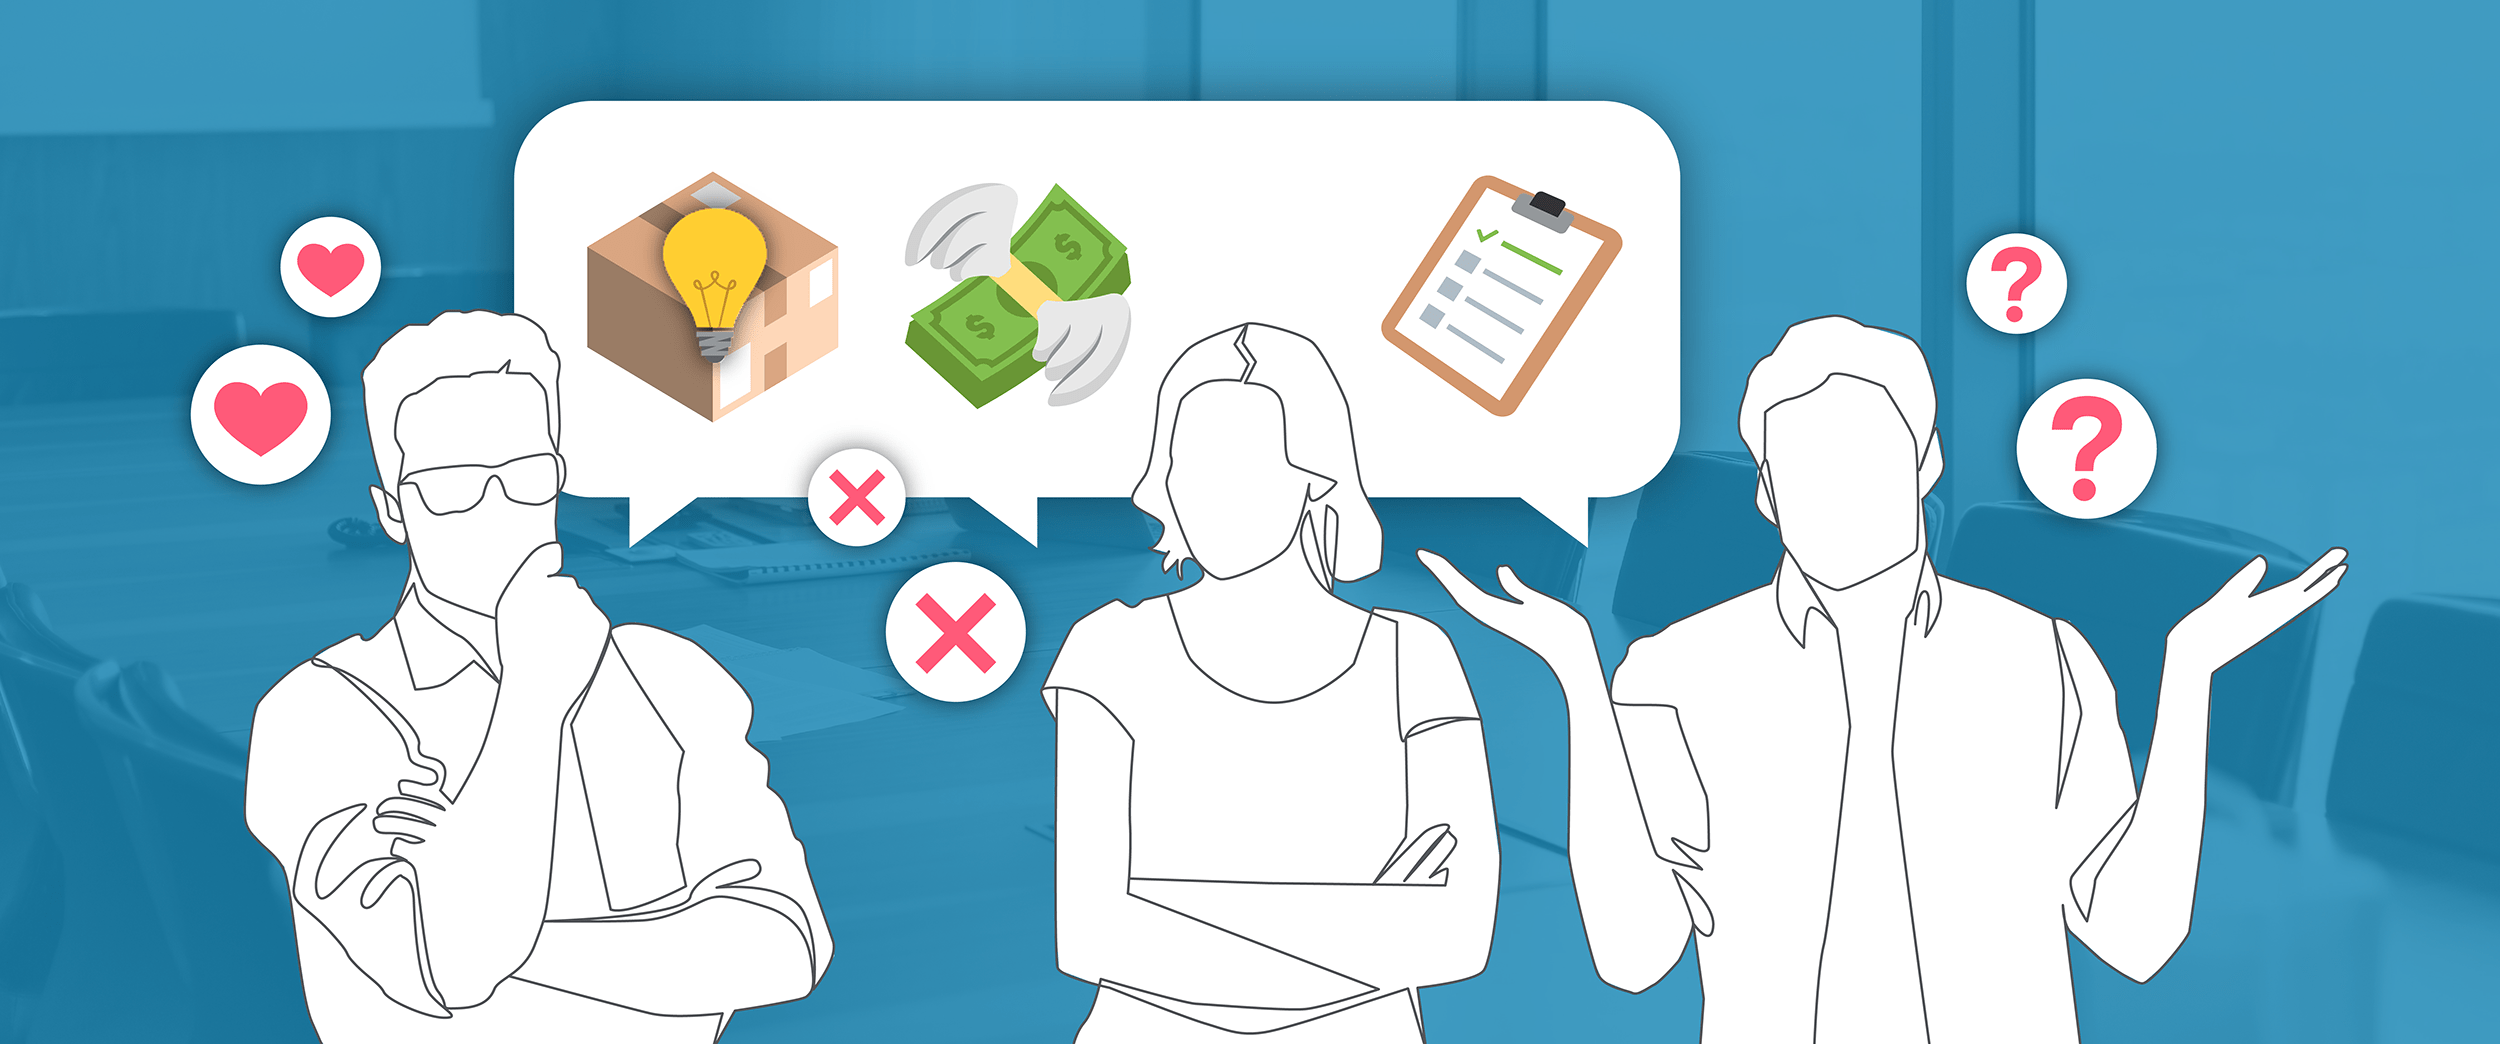 Illustration of people discussing a product with various emotions